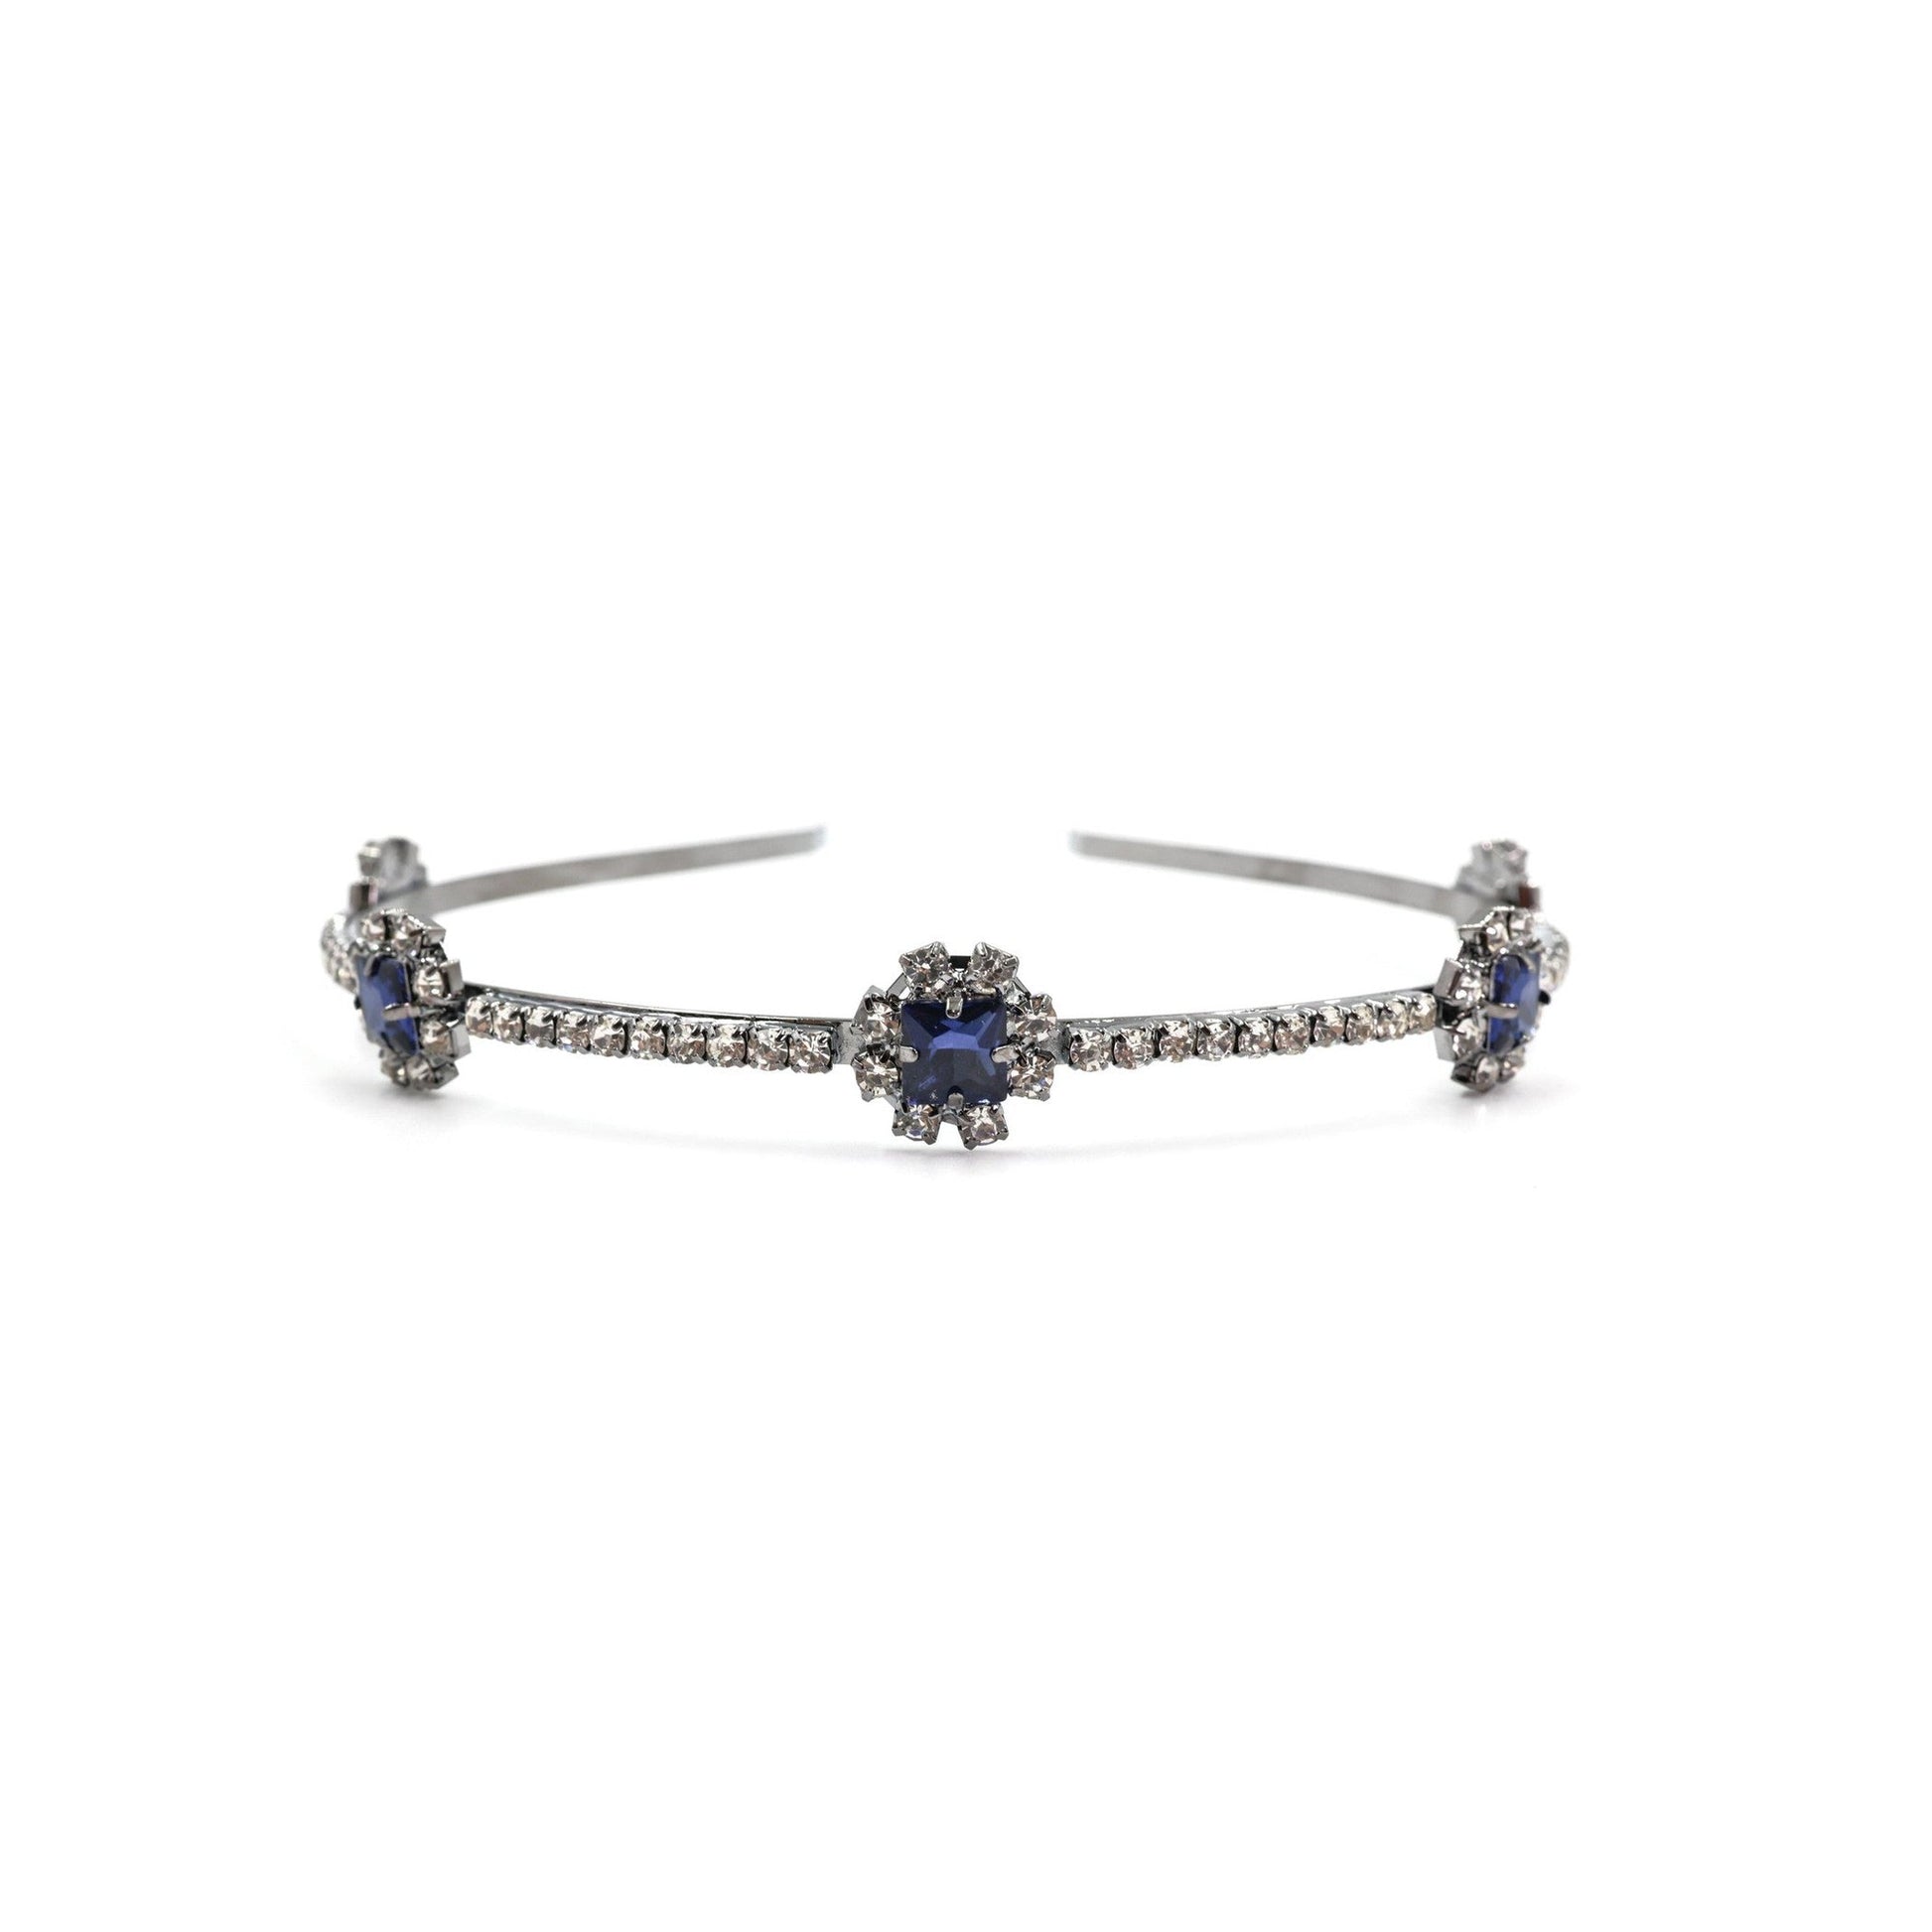 Royal Sapphire Tiara Crown in Blue and Silver | Royalty Crown Party or Bridal Hair Accessory